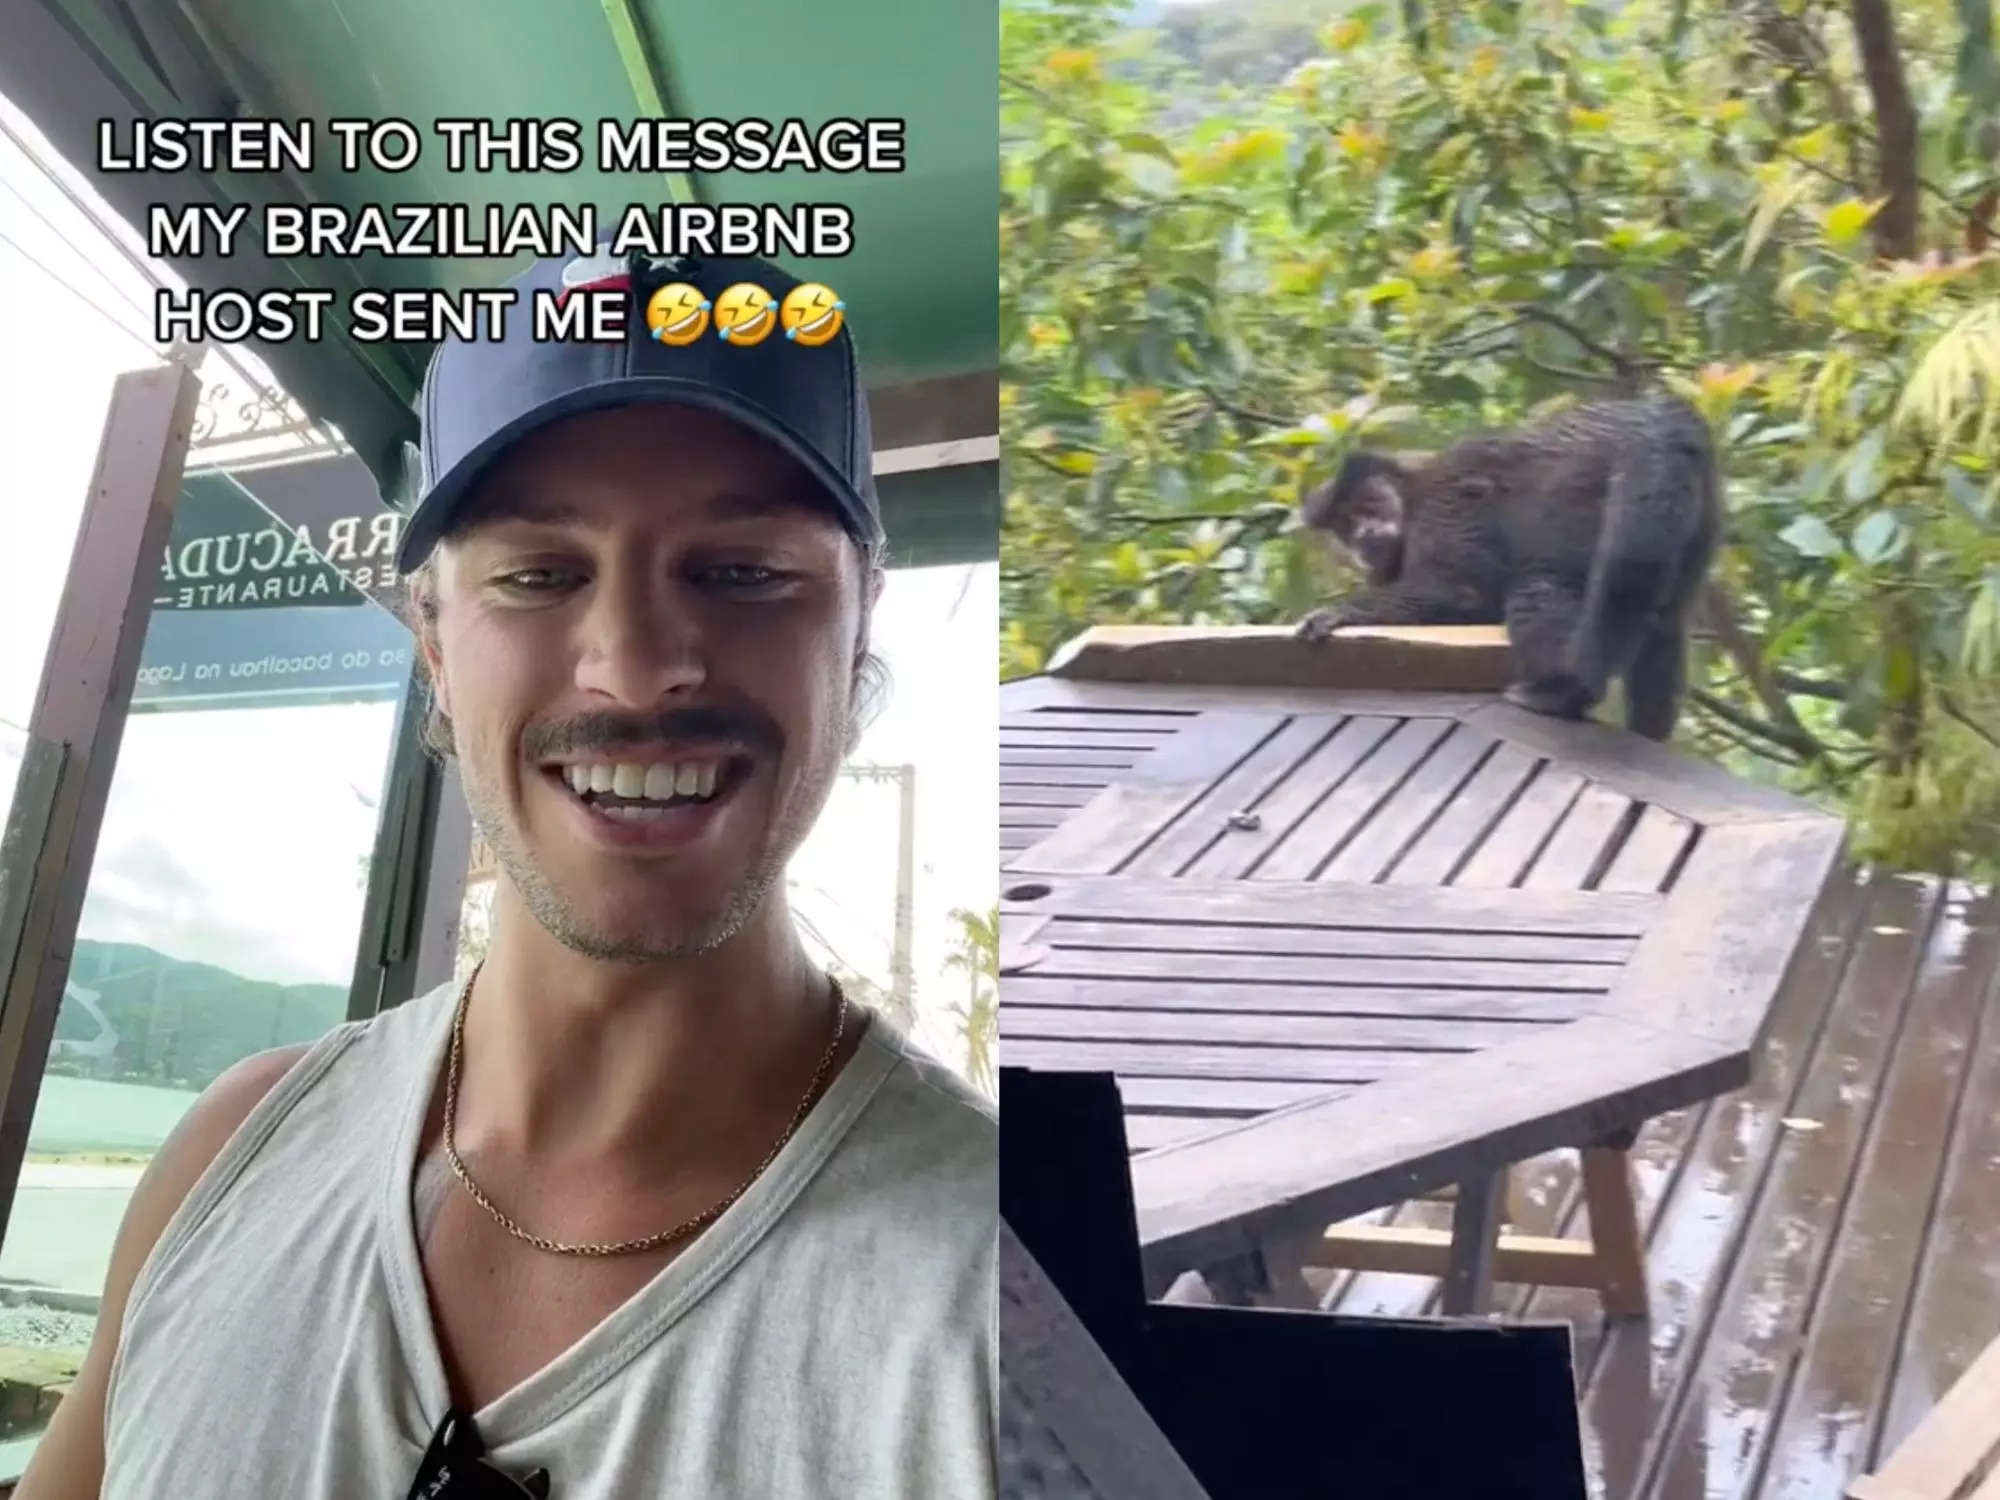 A travel influencer shared voice notes from his Airbnb host warning him about monkeys breaking in and raiding the fridge